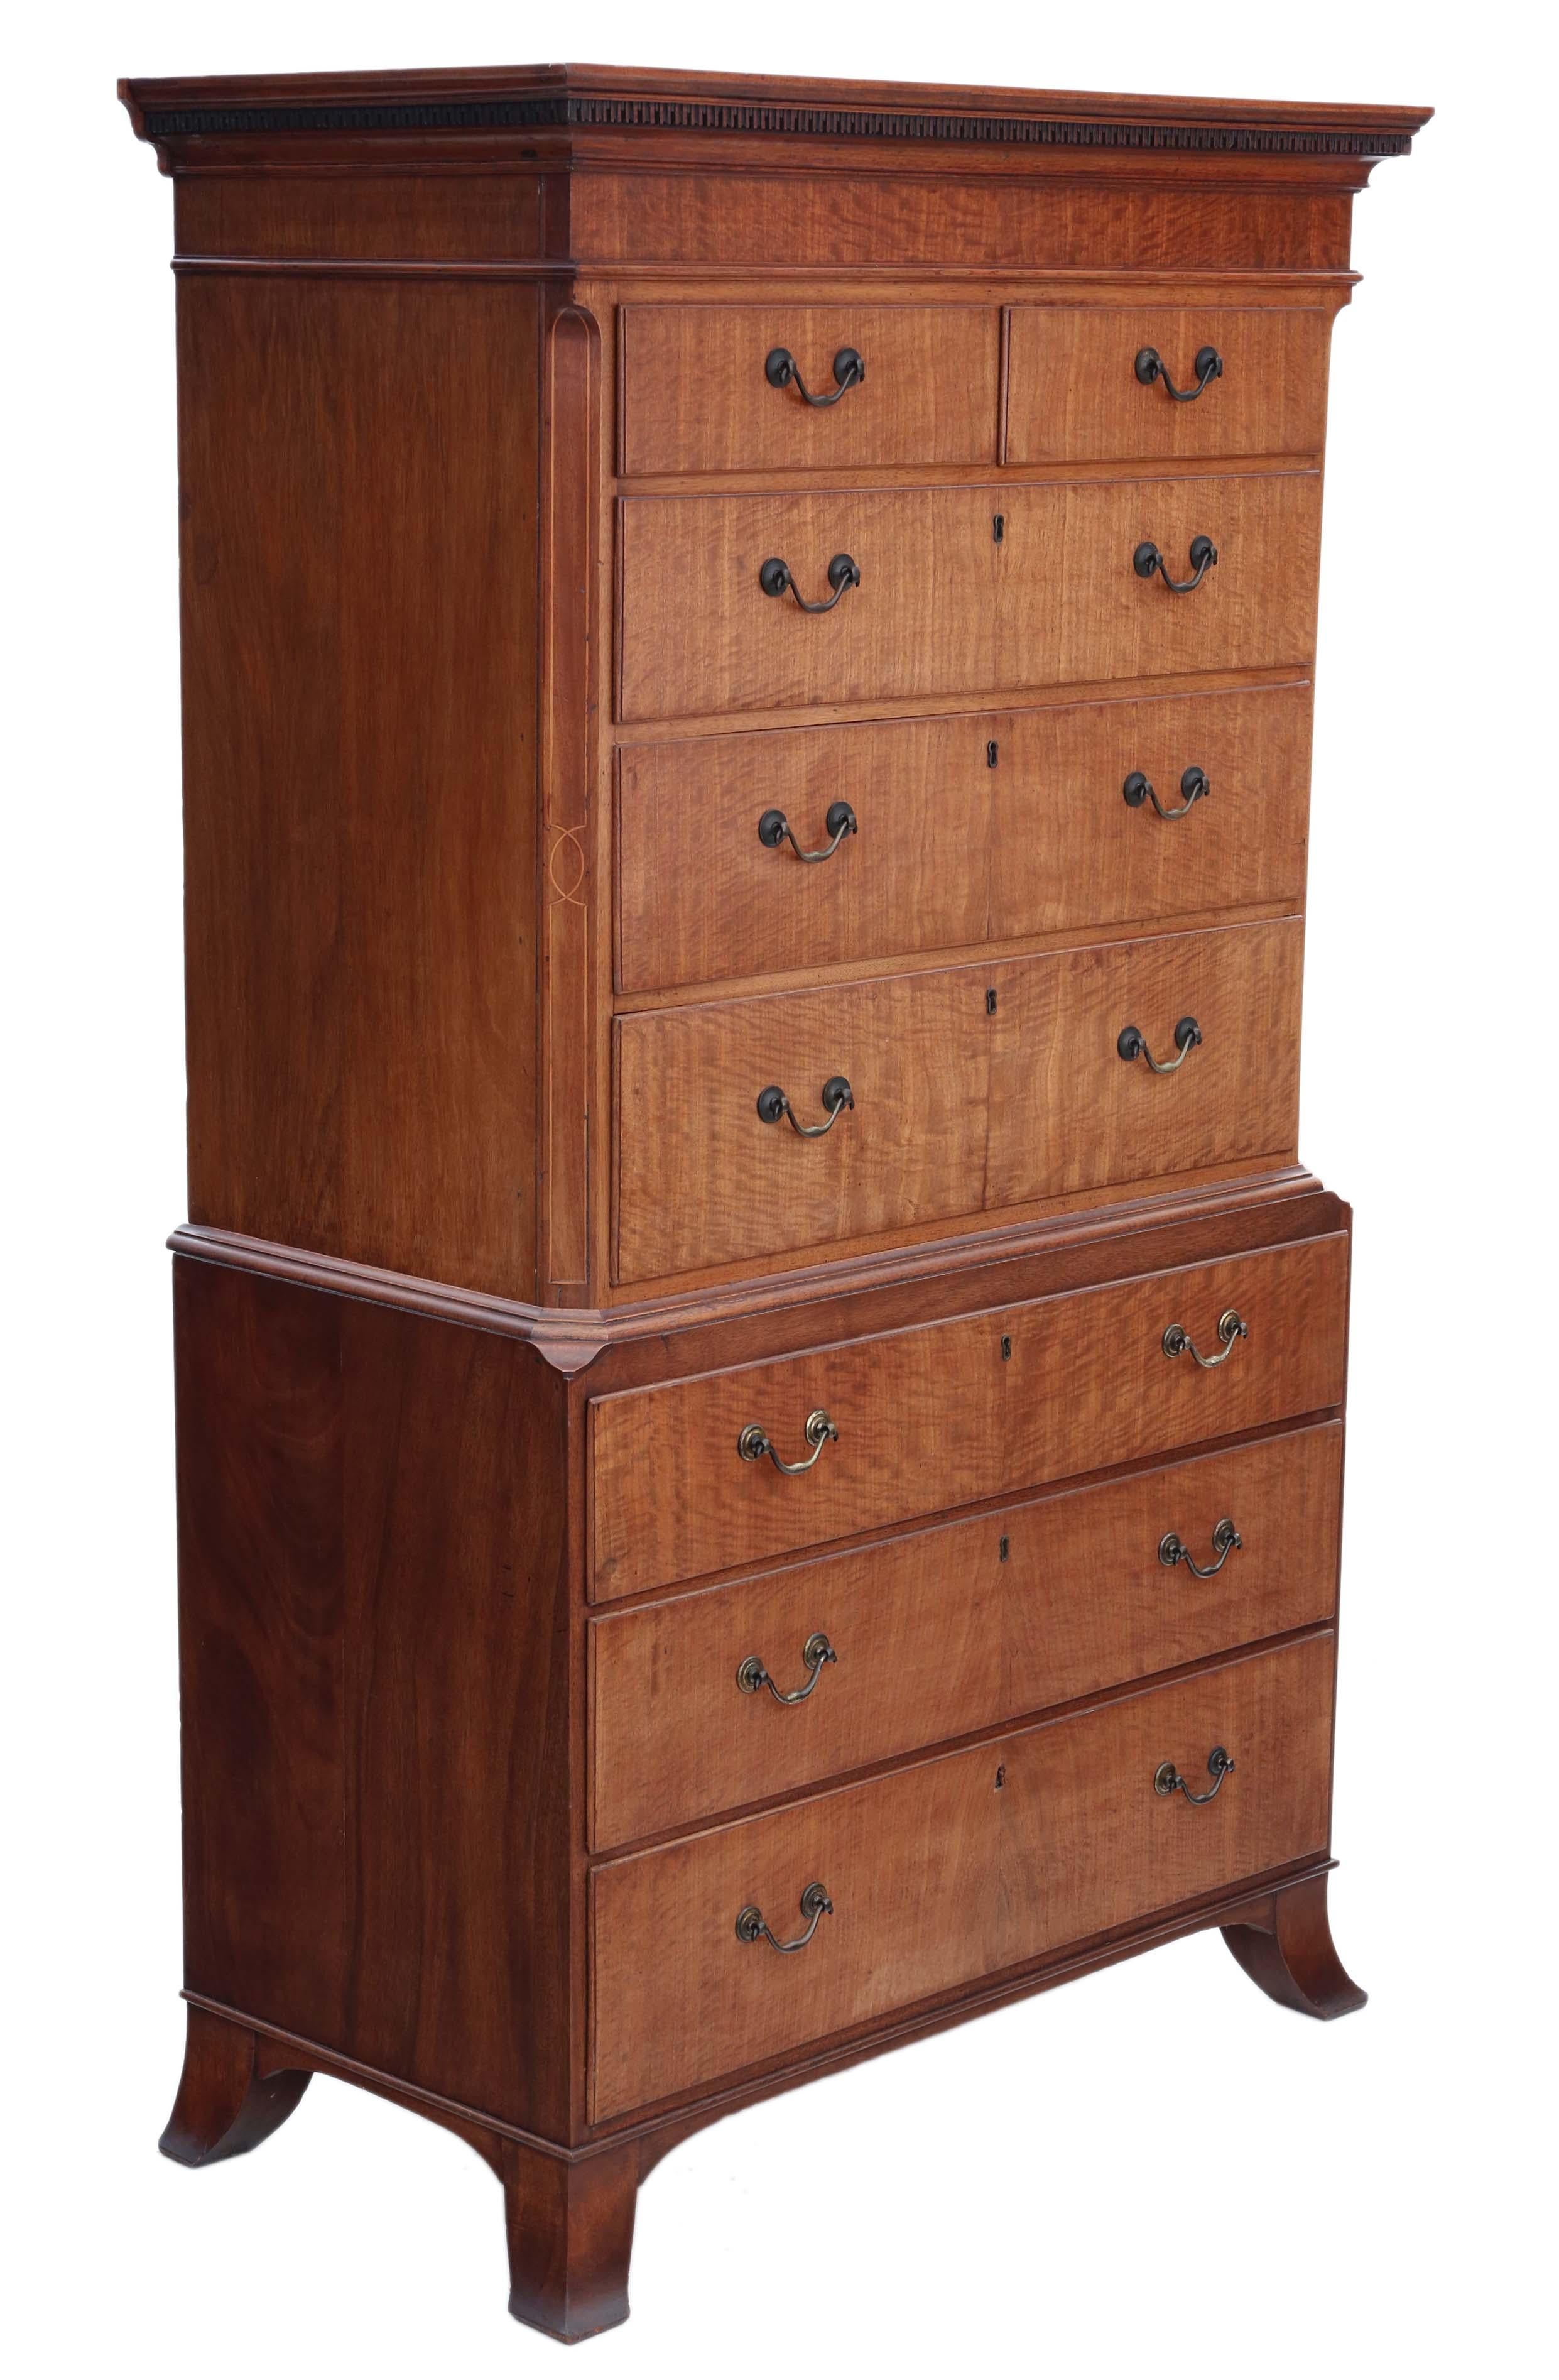 Antique 19th Century Inlaid Mahogany Tallboy Chest on Chest of Drawers For Sale 5